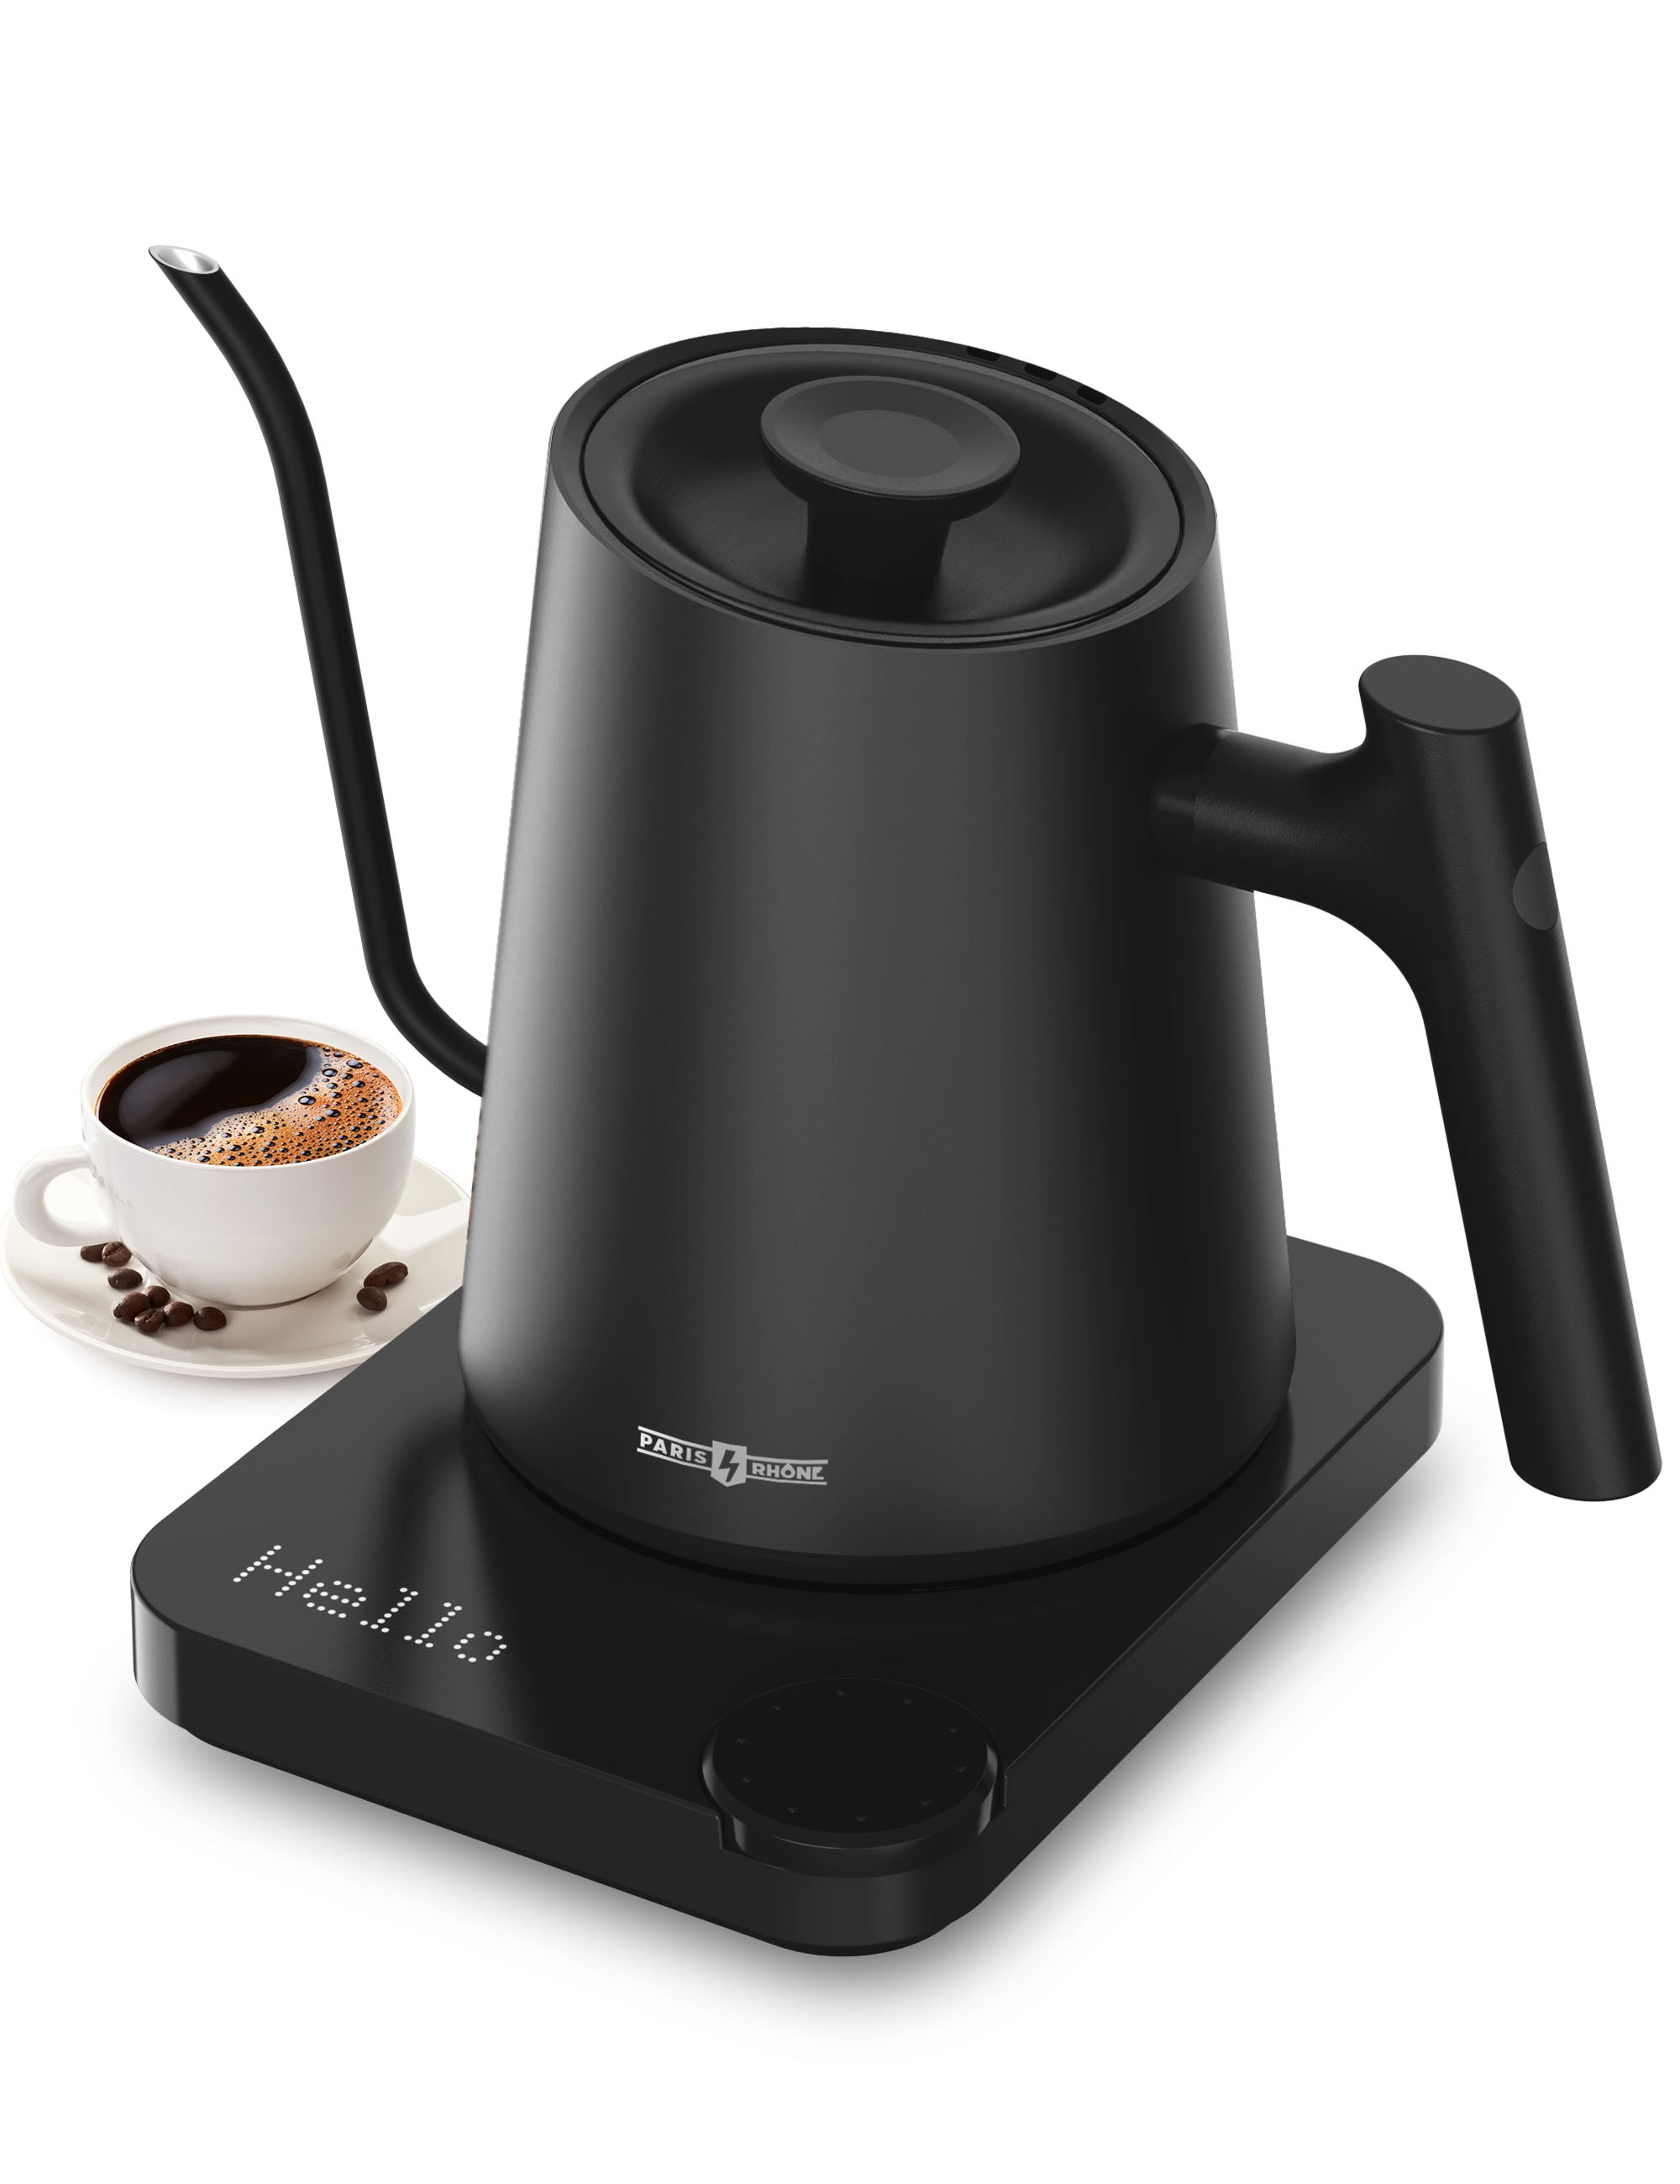 Electric Gooseneck Kettle, 0.9L Pour Over Kettle with Precise 1